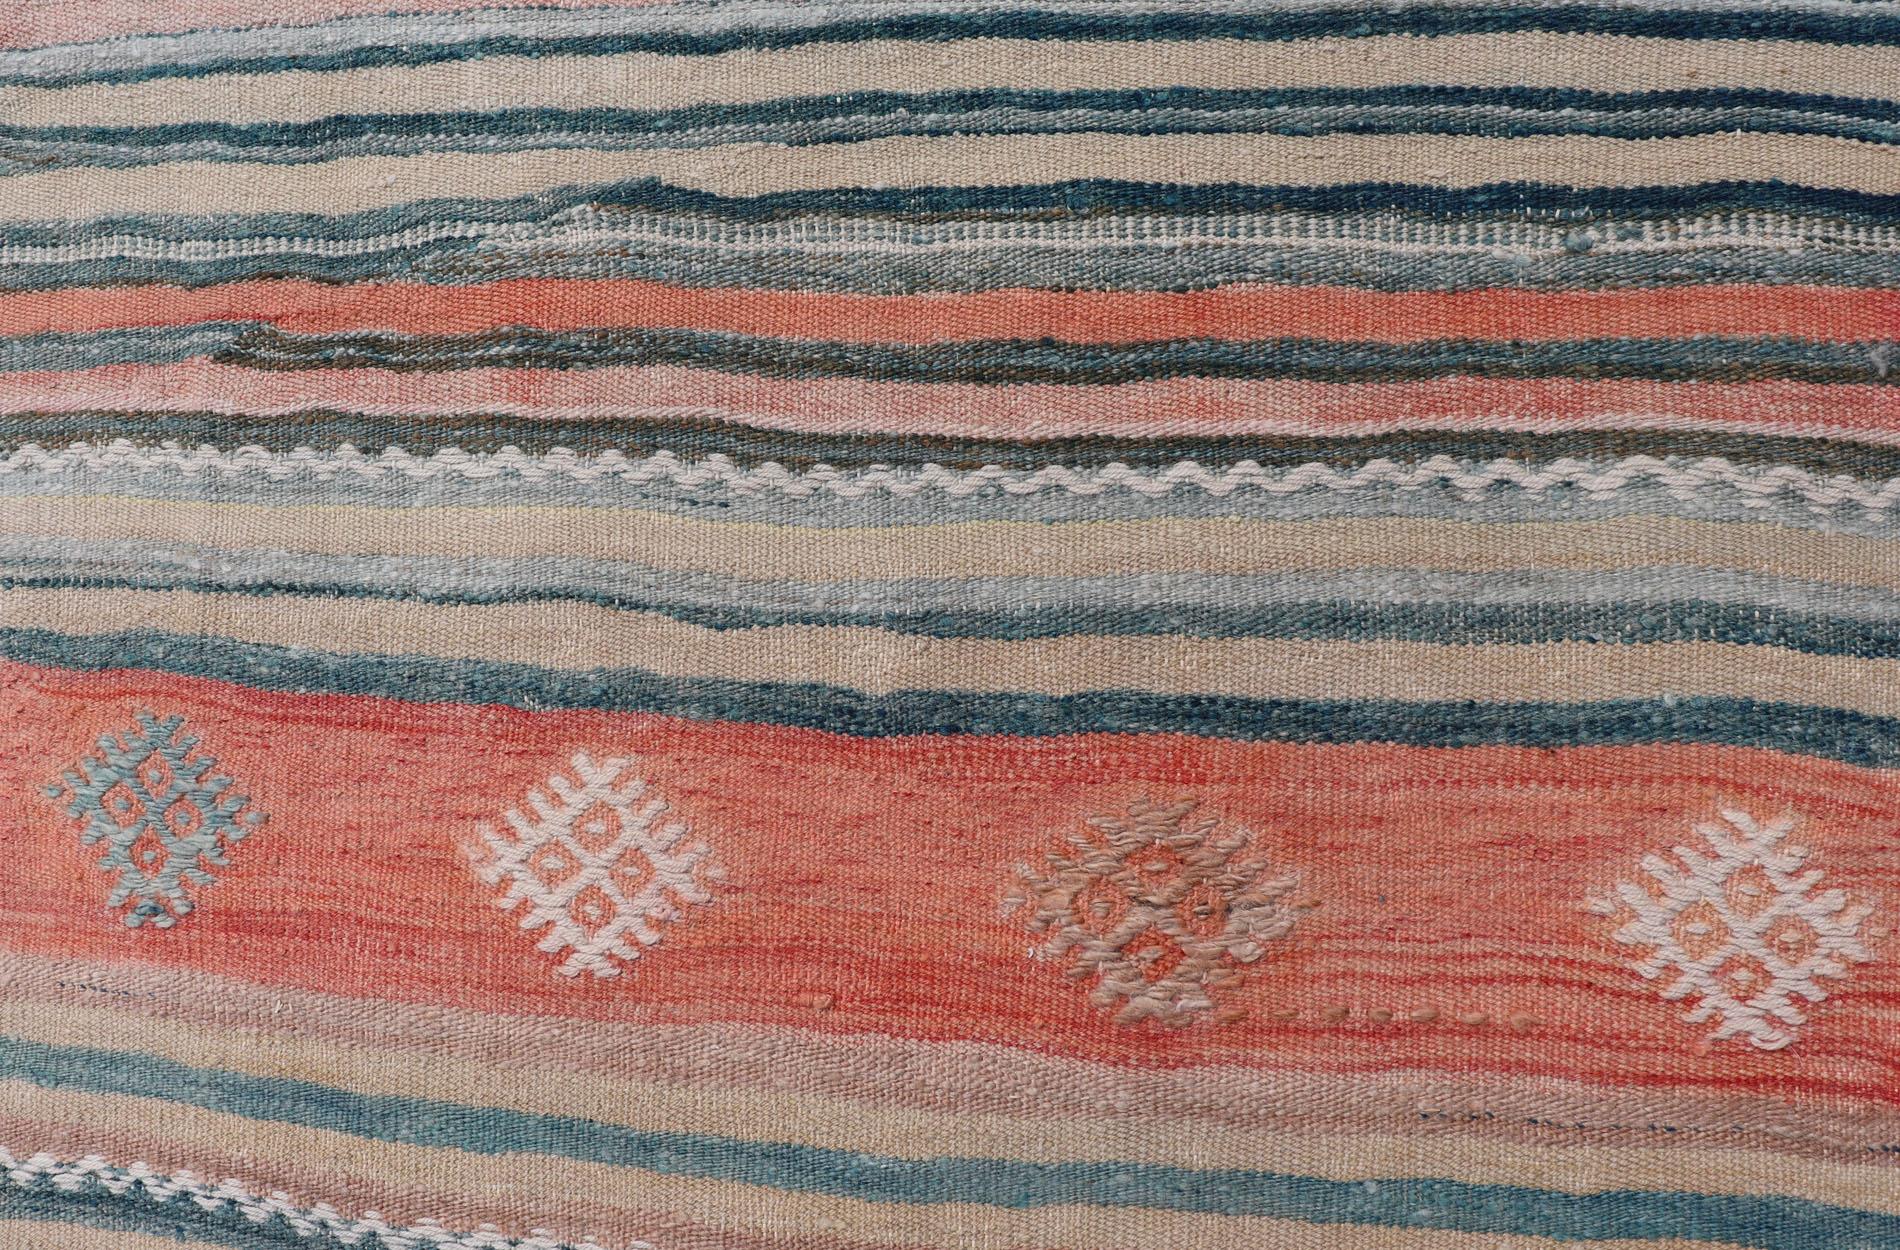 Colorful Vintage Turkish Embroidered Kilim with Stripes and Geometric Motifs In Good Condition For Sale In Atlanta, GA